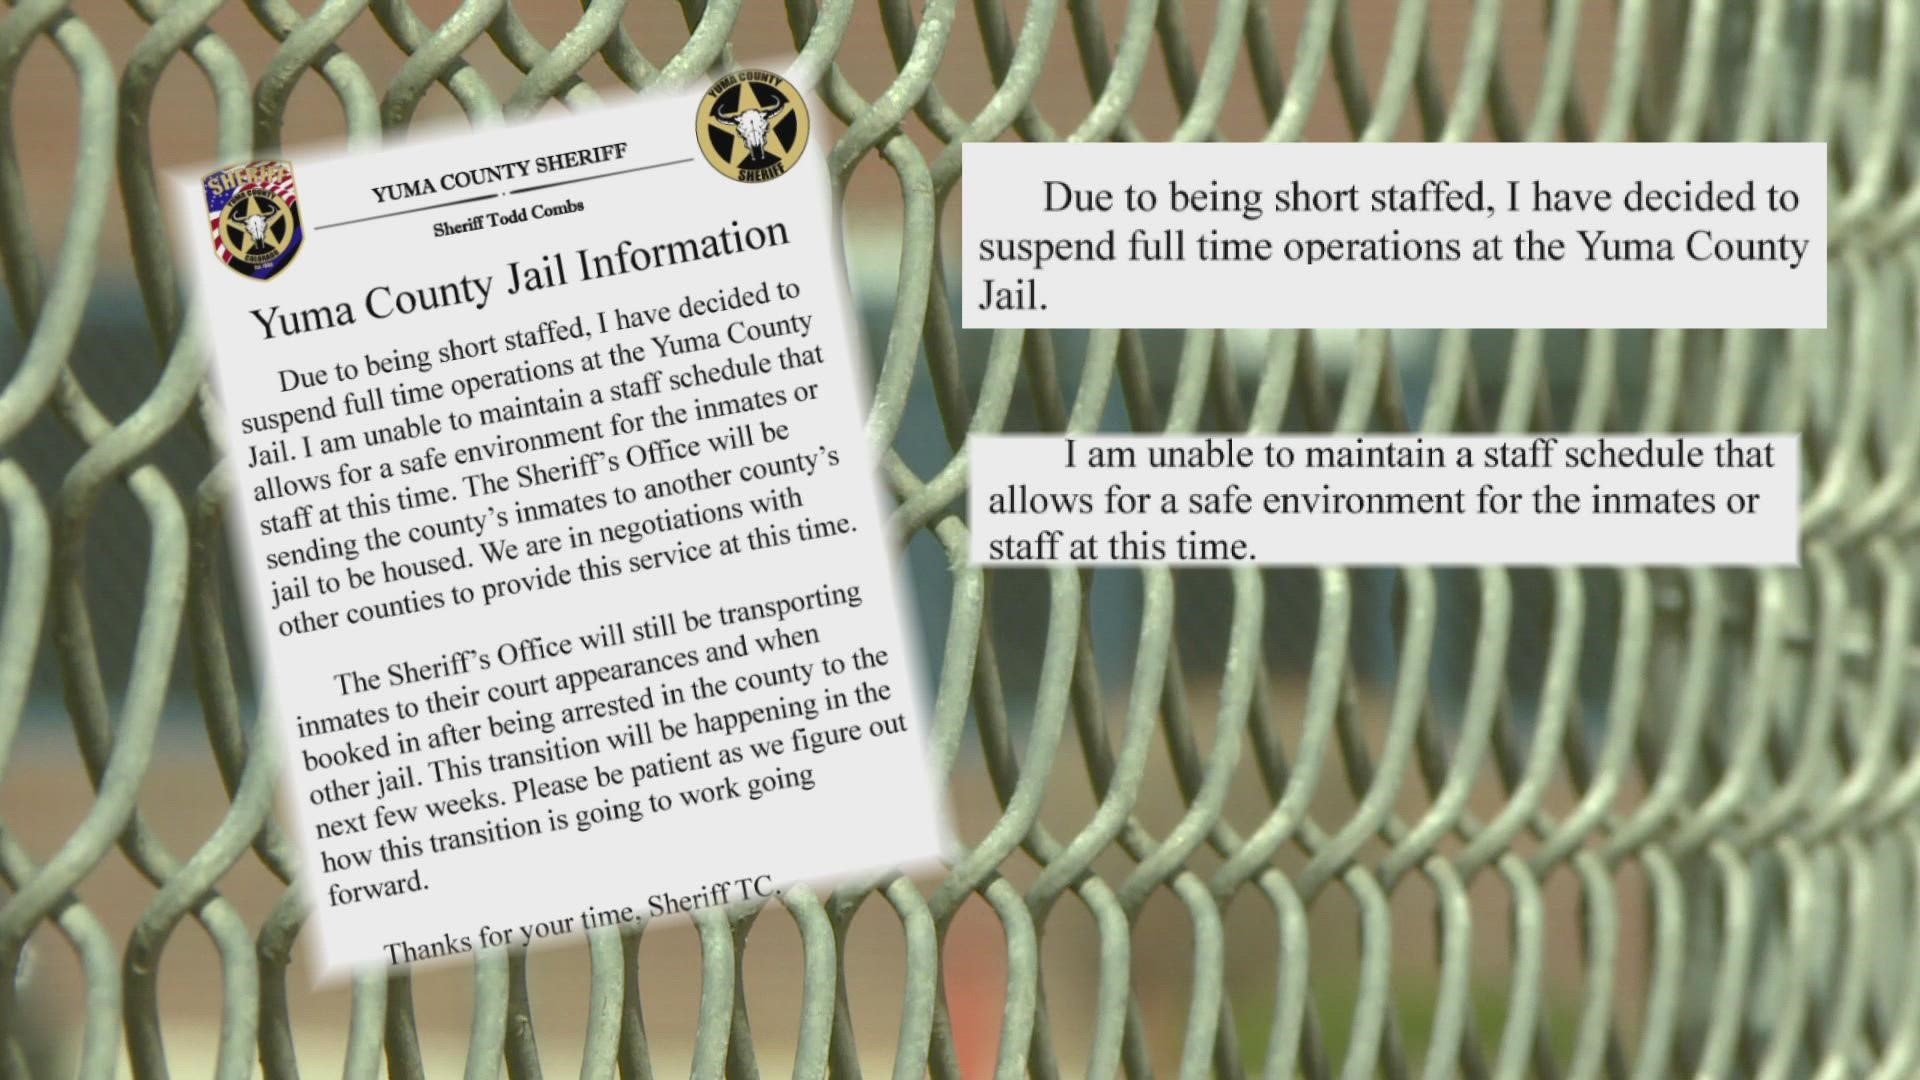 In a Facebook post, Sheriff Todd Combs said that he's unable to maintain a staff schedule that allows for a safe environment for the current inmates and staff.